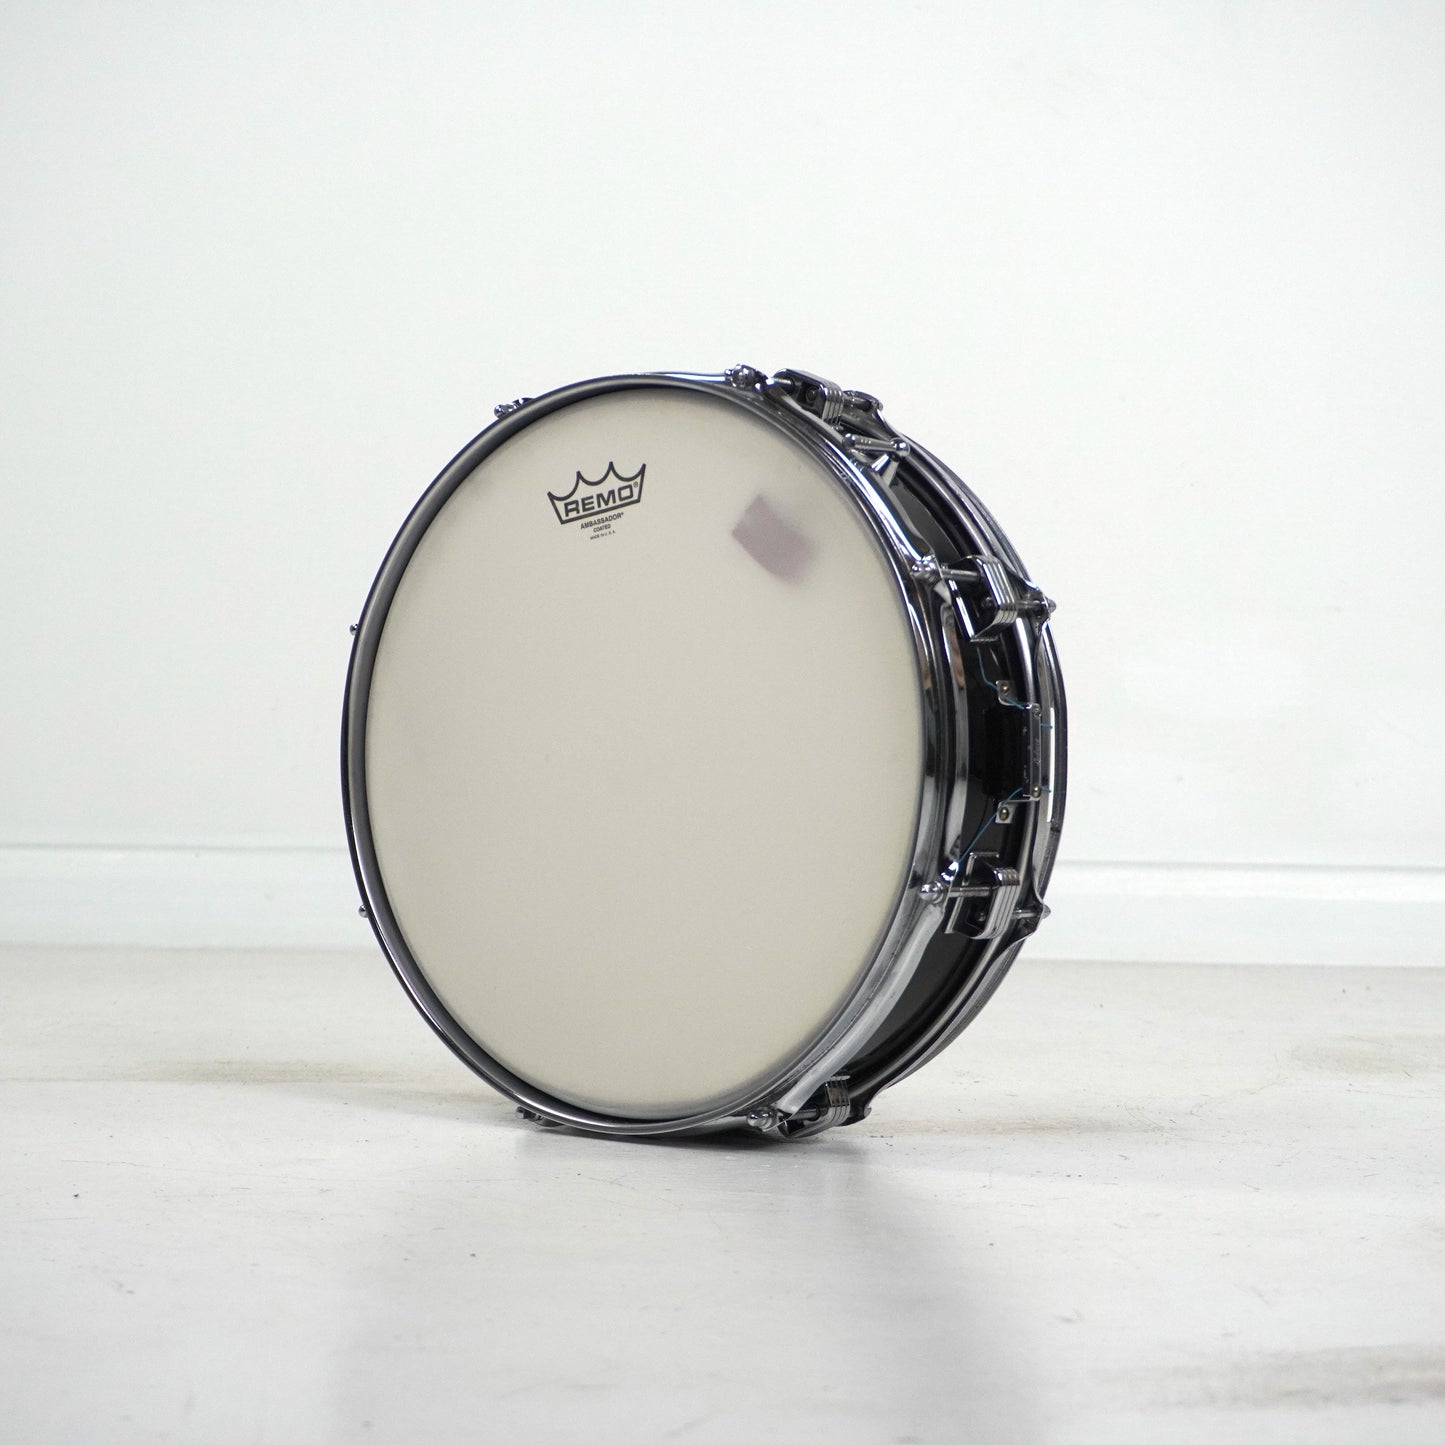 WFL 14" x 4" Black Snare Drum 1960s